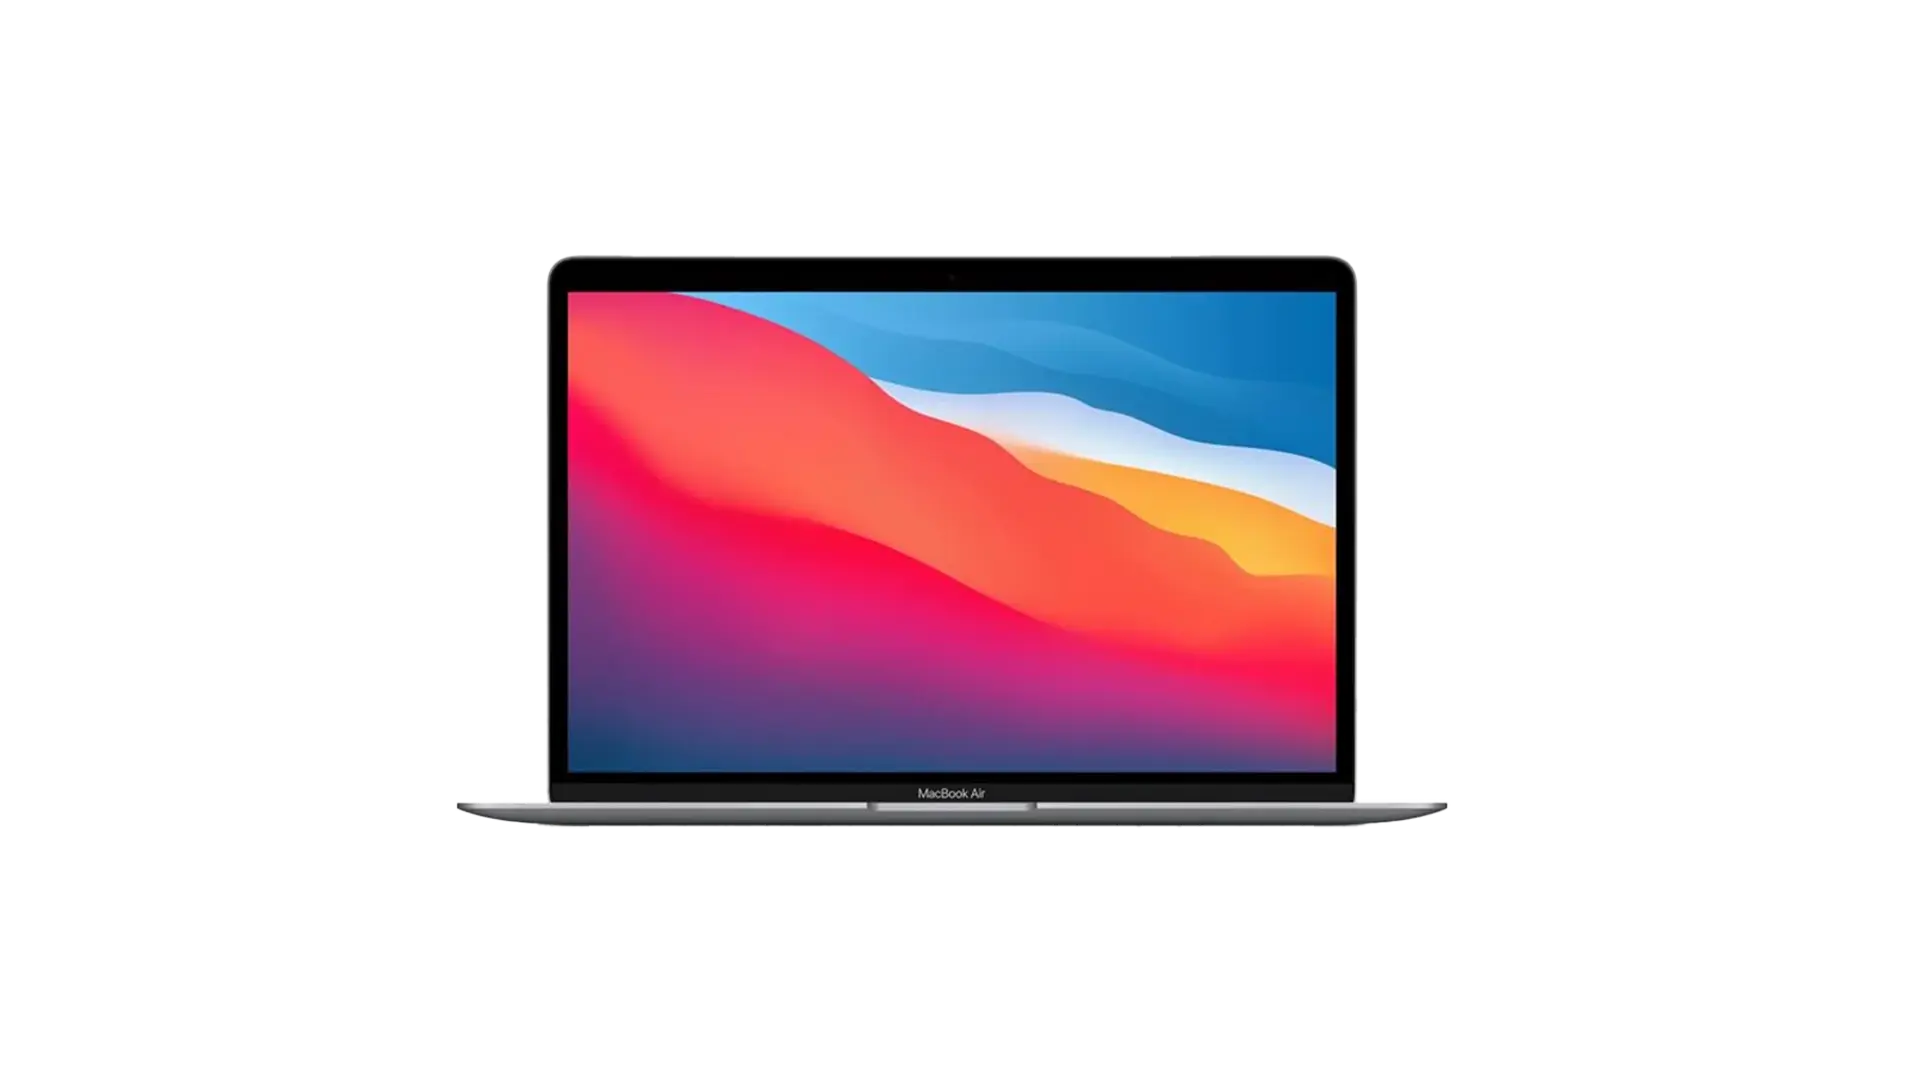 Apple MacBook Air (M1 2020) - The best MacBook for programmers on a budget